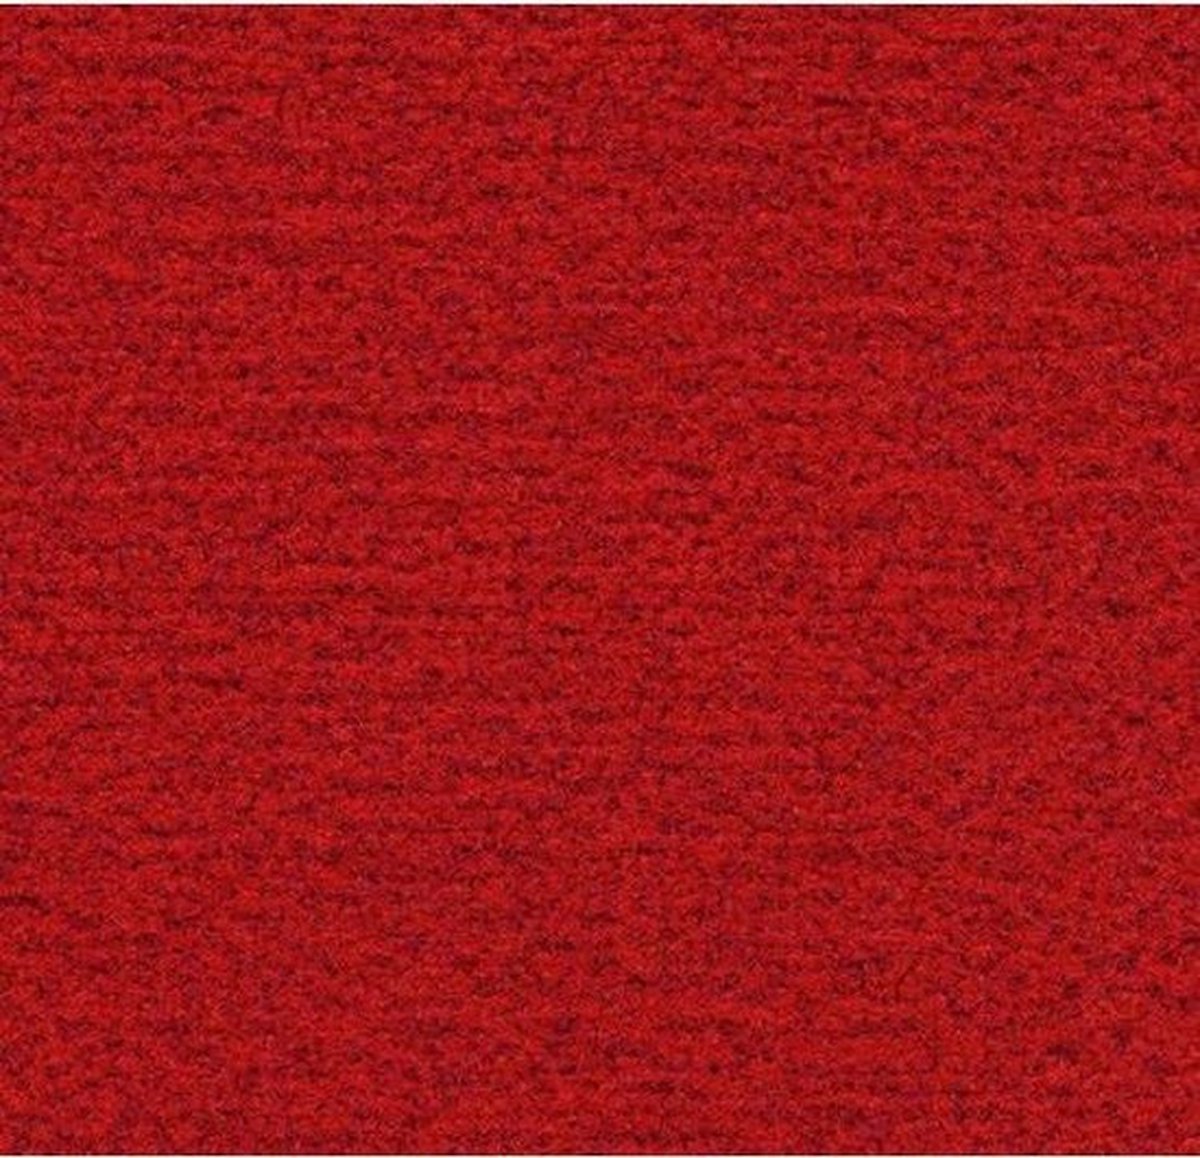 Forbo Coral Classic 4753 Bright Red - Droogloopmat - 100 x 100 cm - 9 mm Dik - Op Maat Gesneden